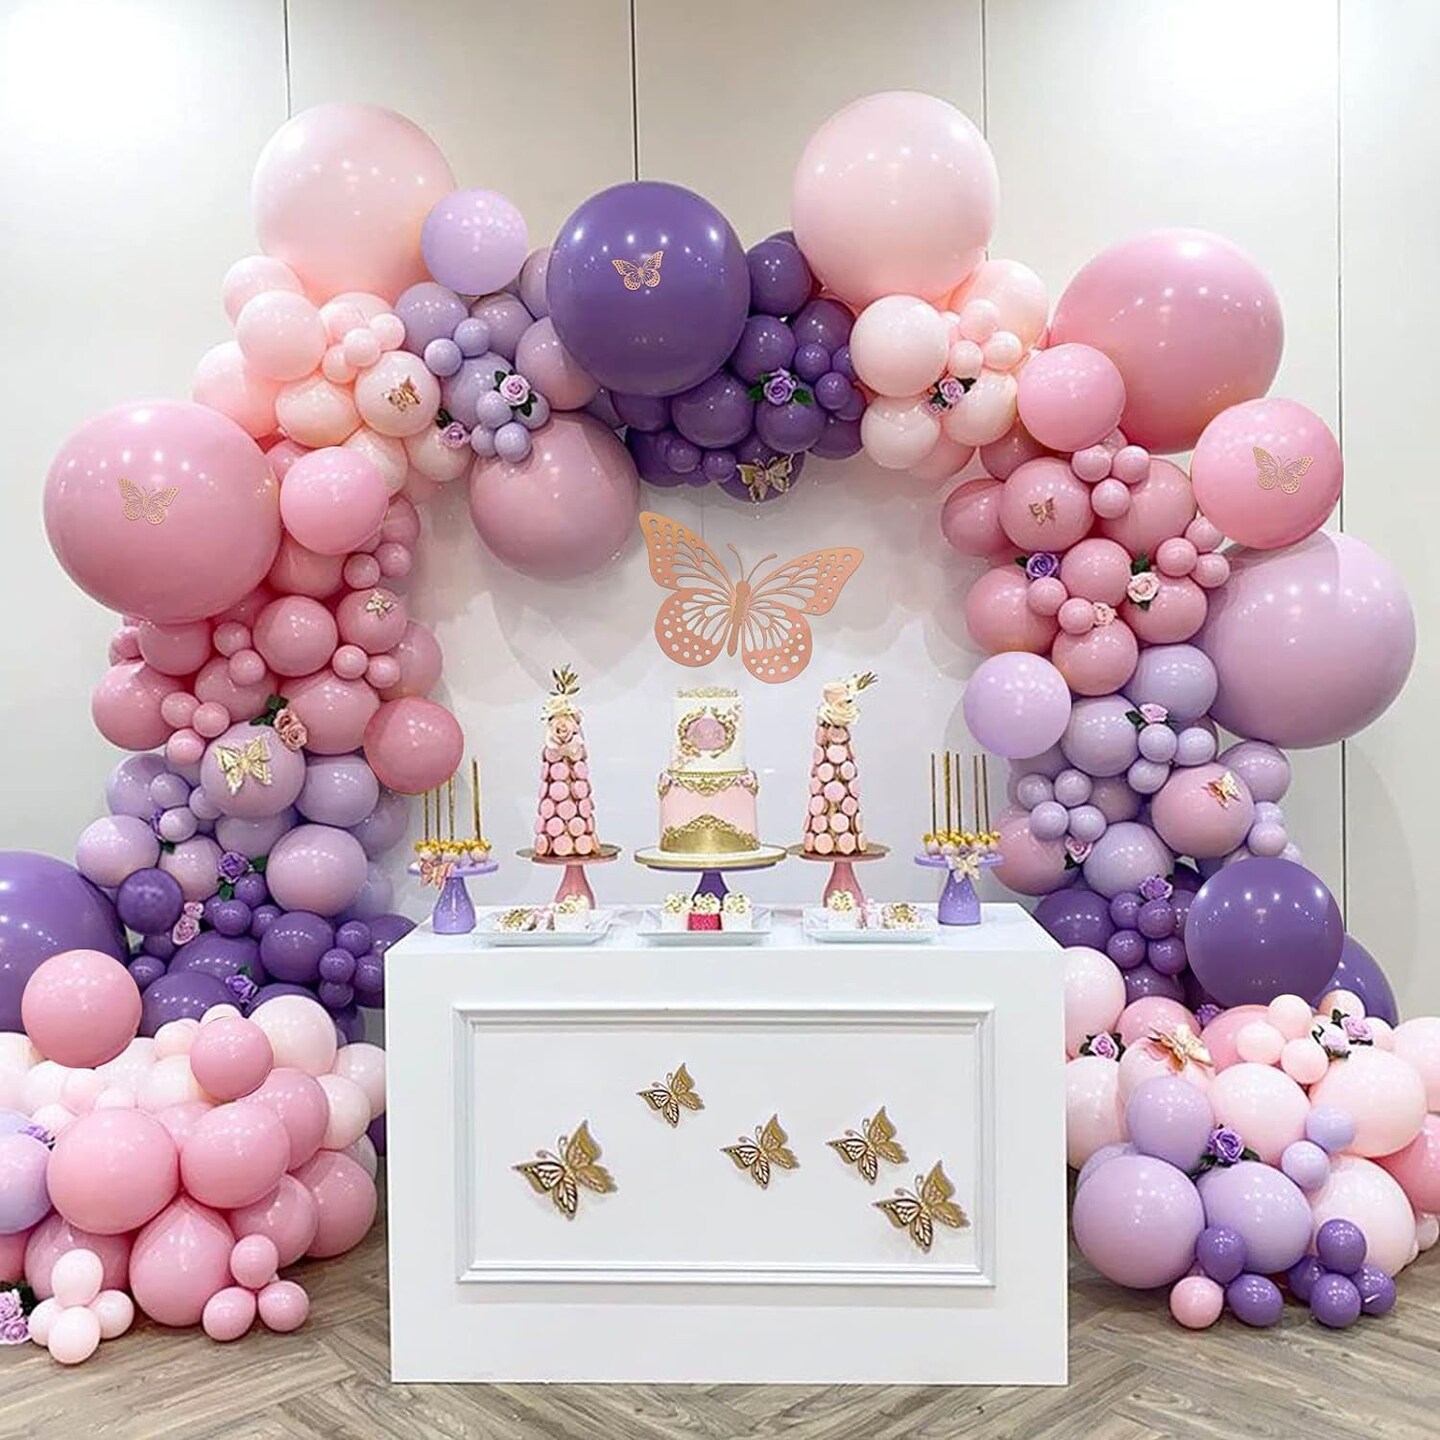 180pcs Pastel Pink Purple Balloon Garland Arch Kit Butterfly Stickers Baby Shower Decorations for Girl Birthday Party Bridal Shower Bachelorette Engagement Party Decorations